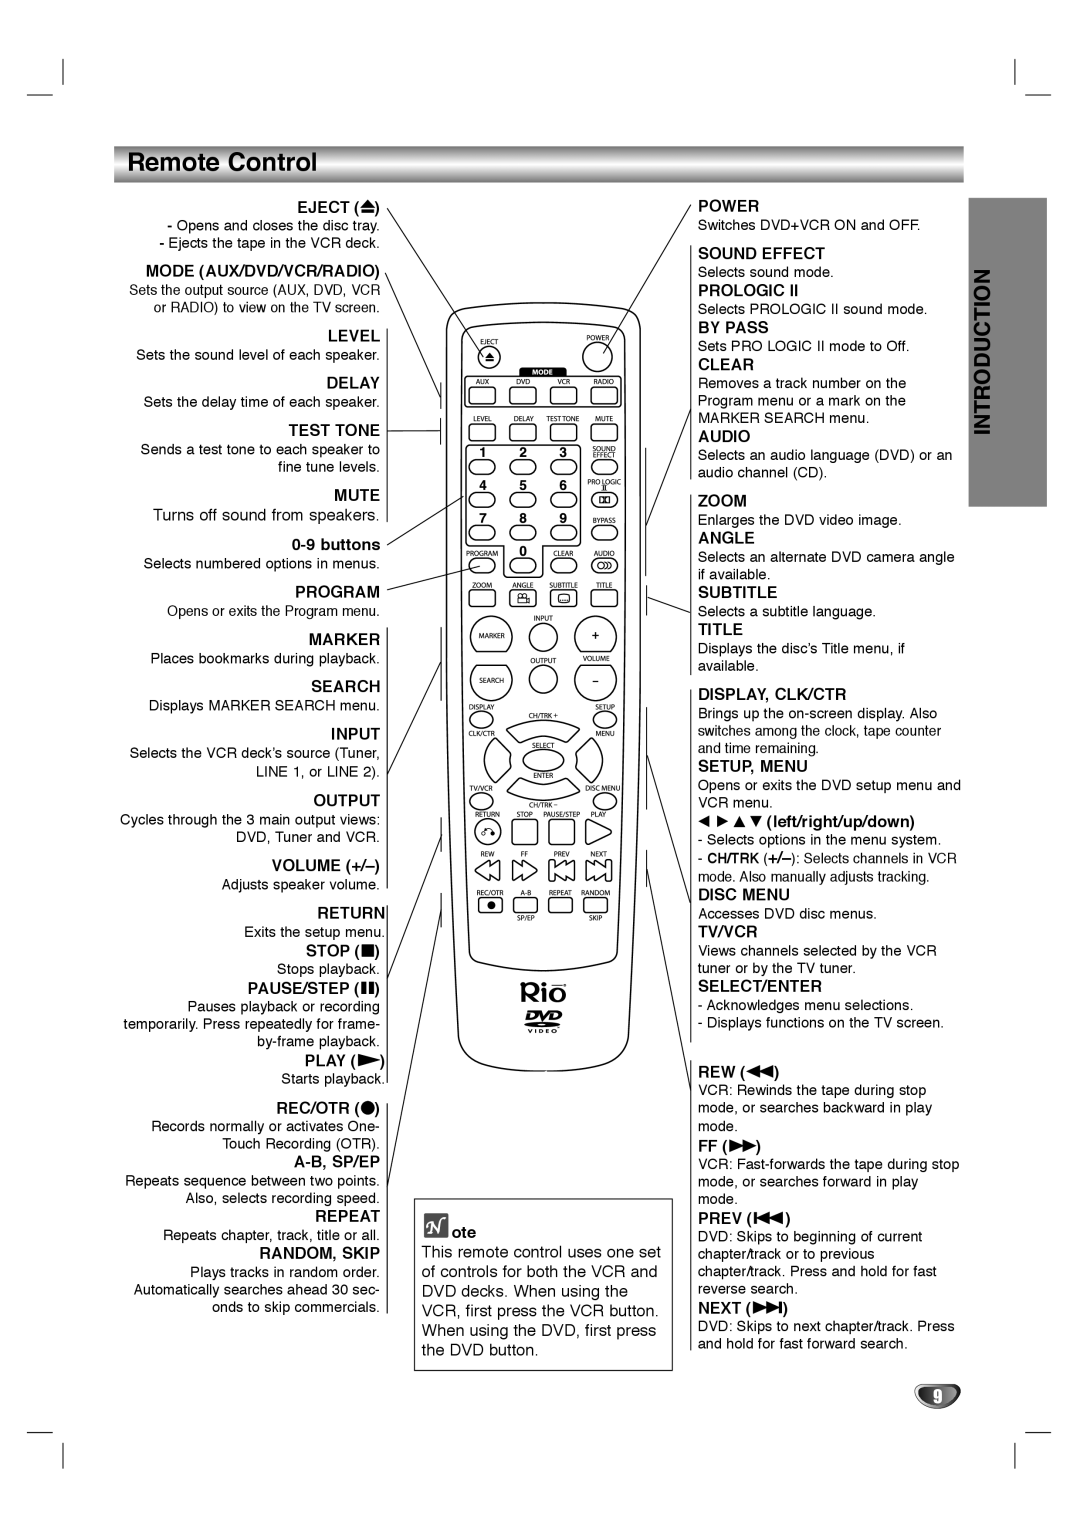 Dolby Laboratories HT2030 manual Remote Control, Introduction 